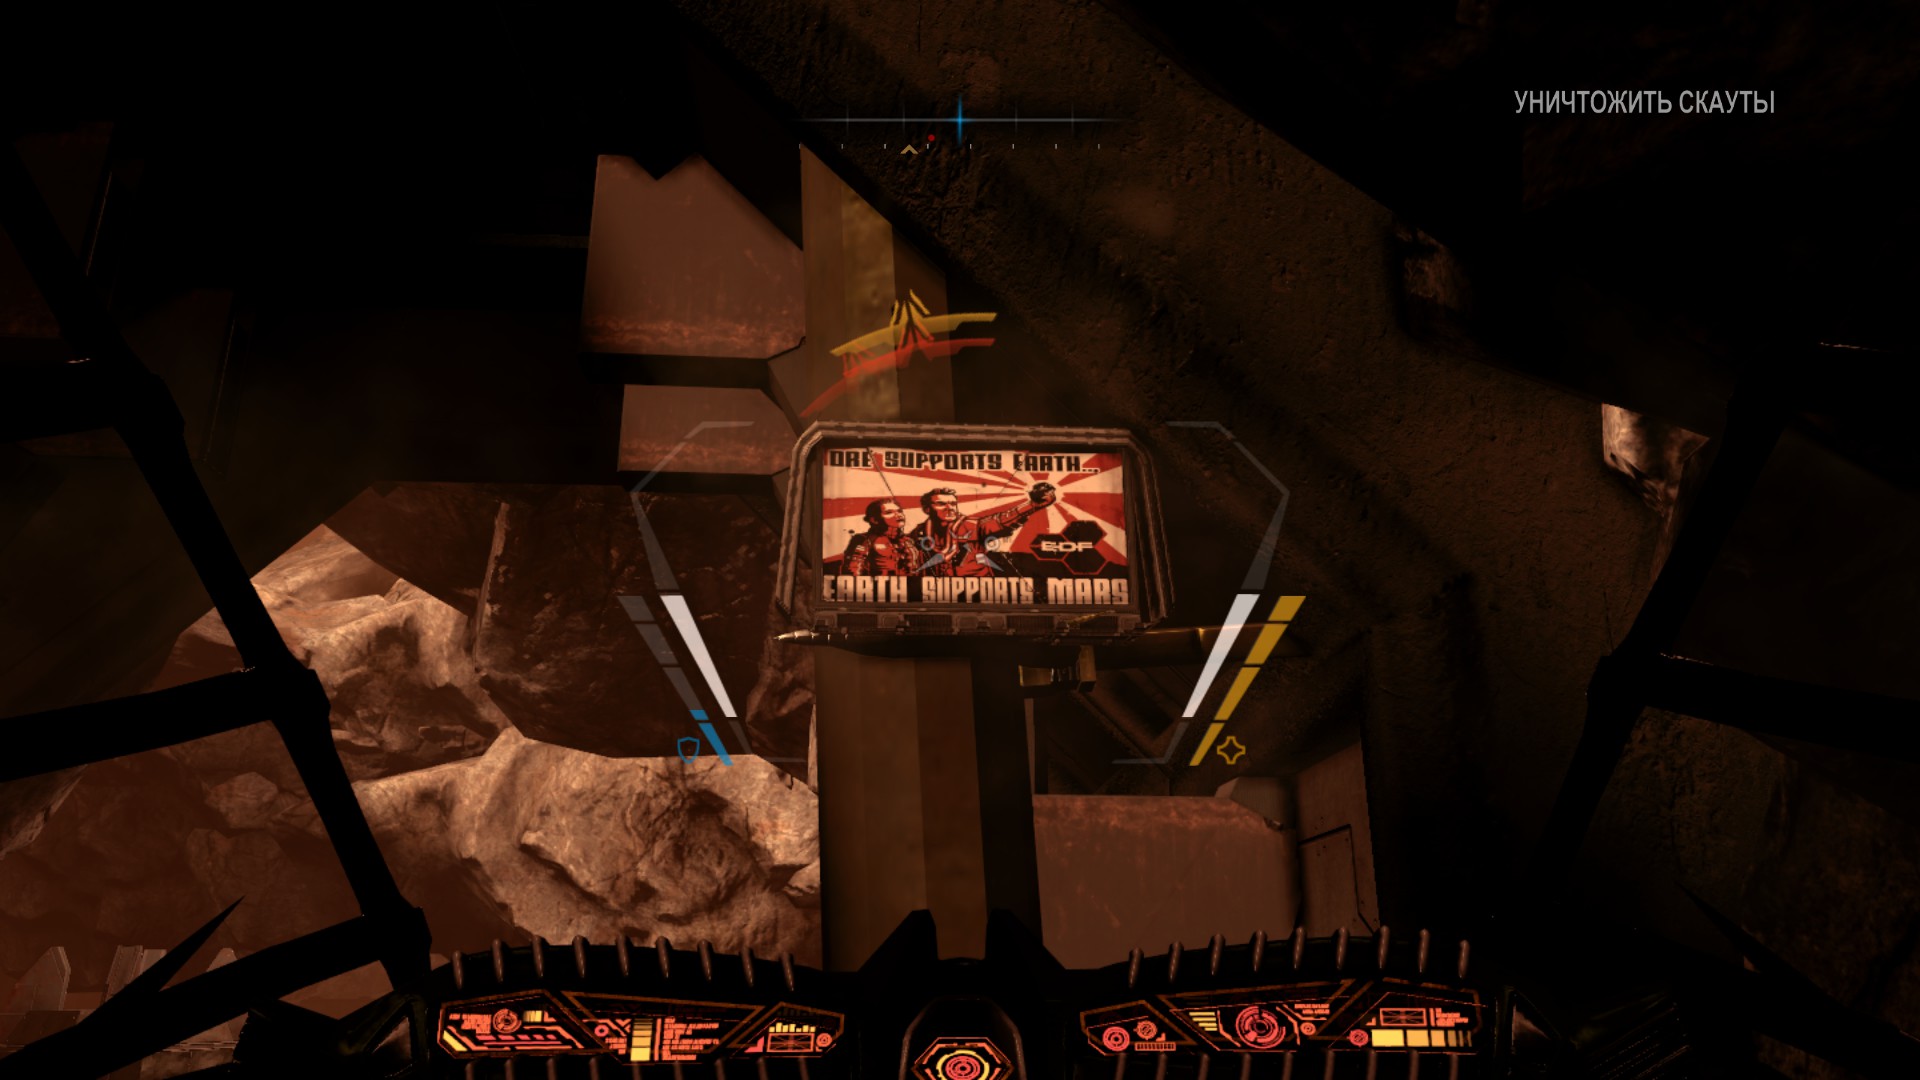 free download red faction armageddon mr toots